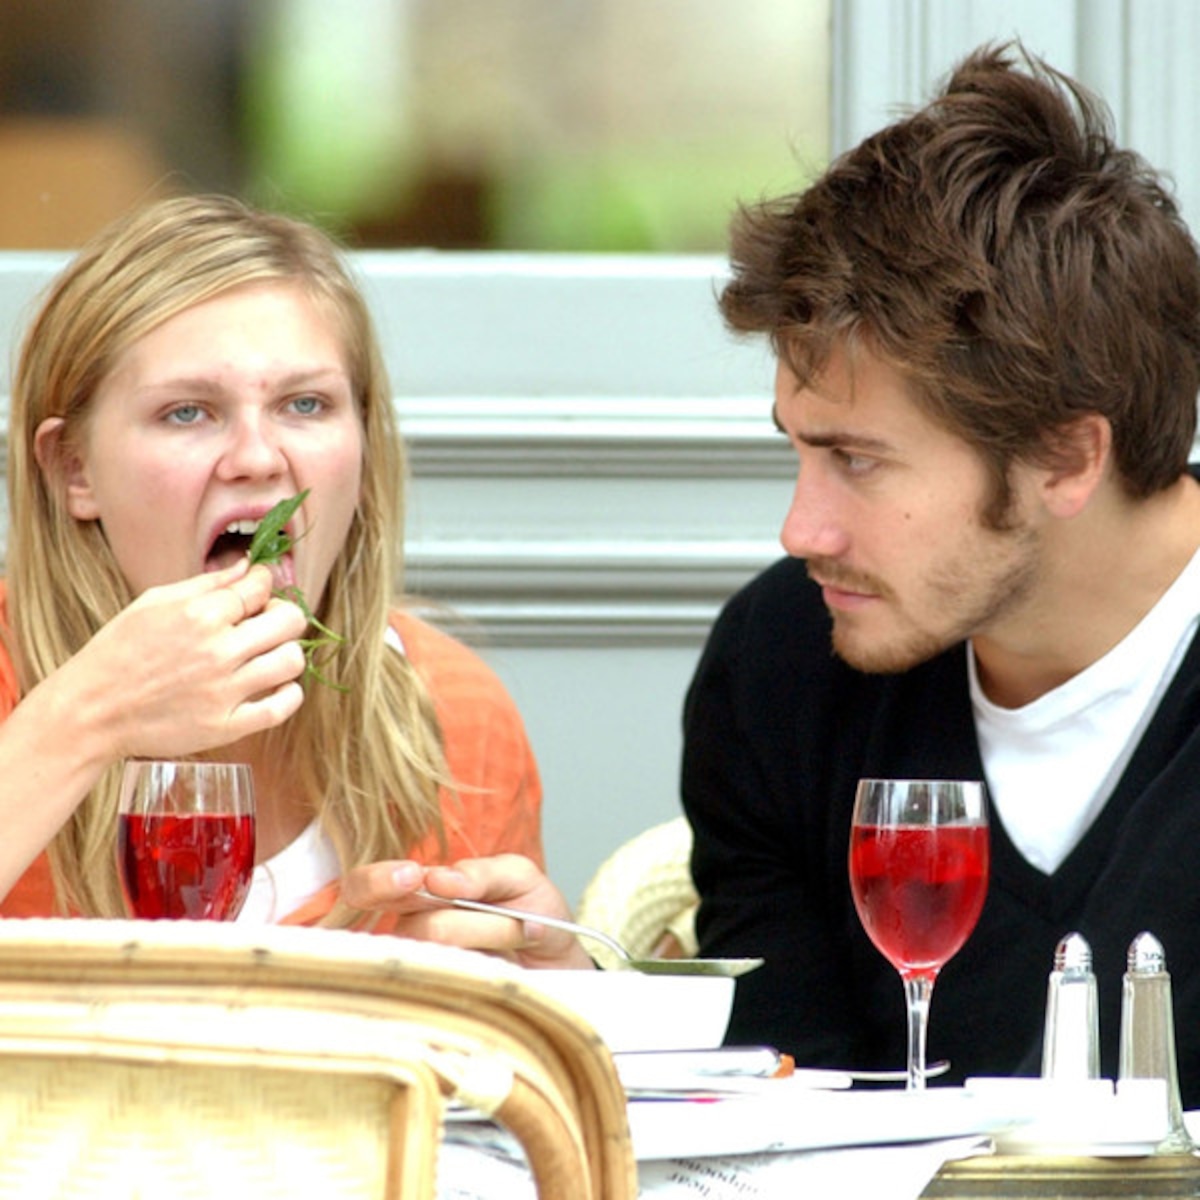 Never Forget When Jake Gyllenhaal Hated How Kirsten Dunst Ate Salad - E! Online